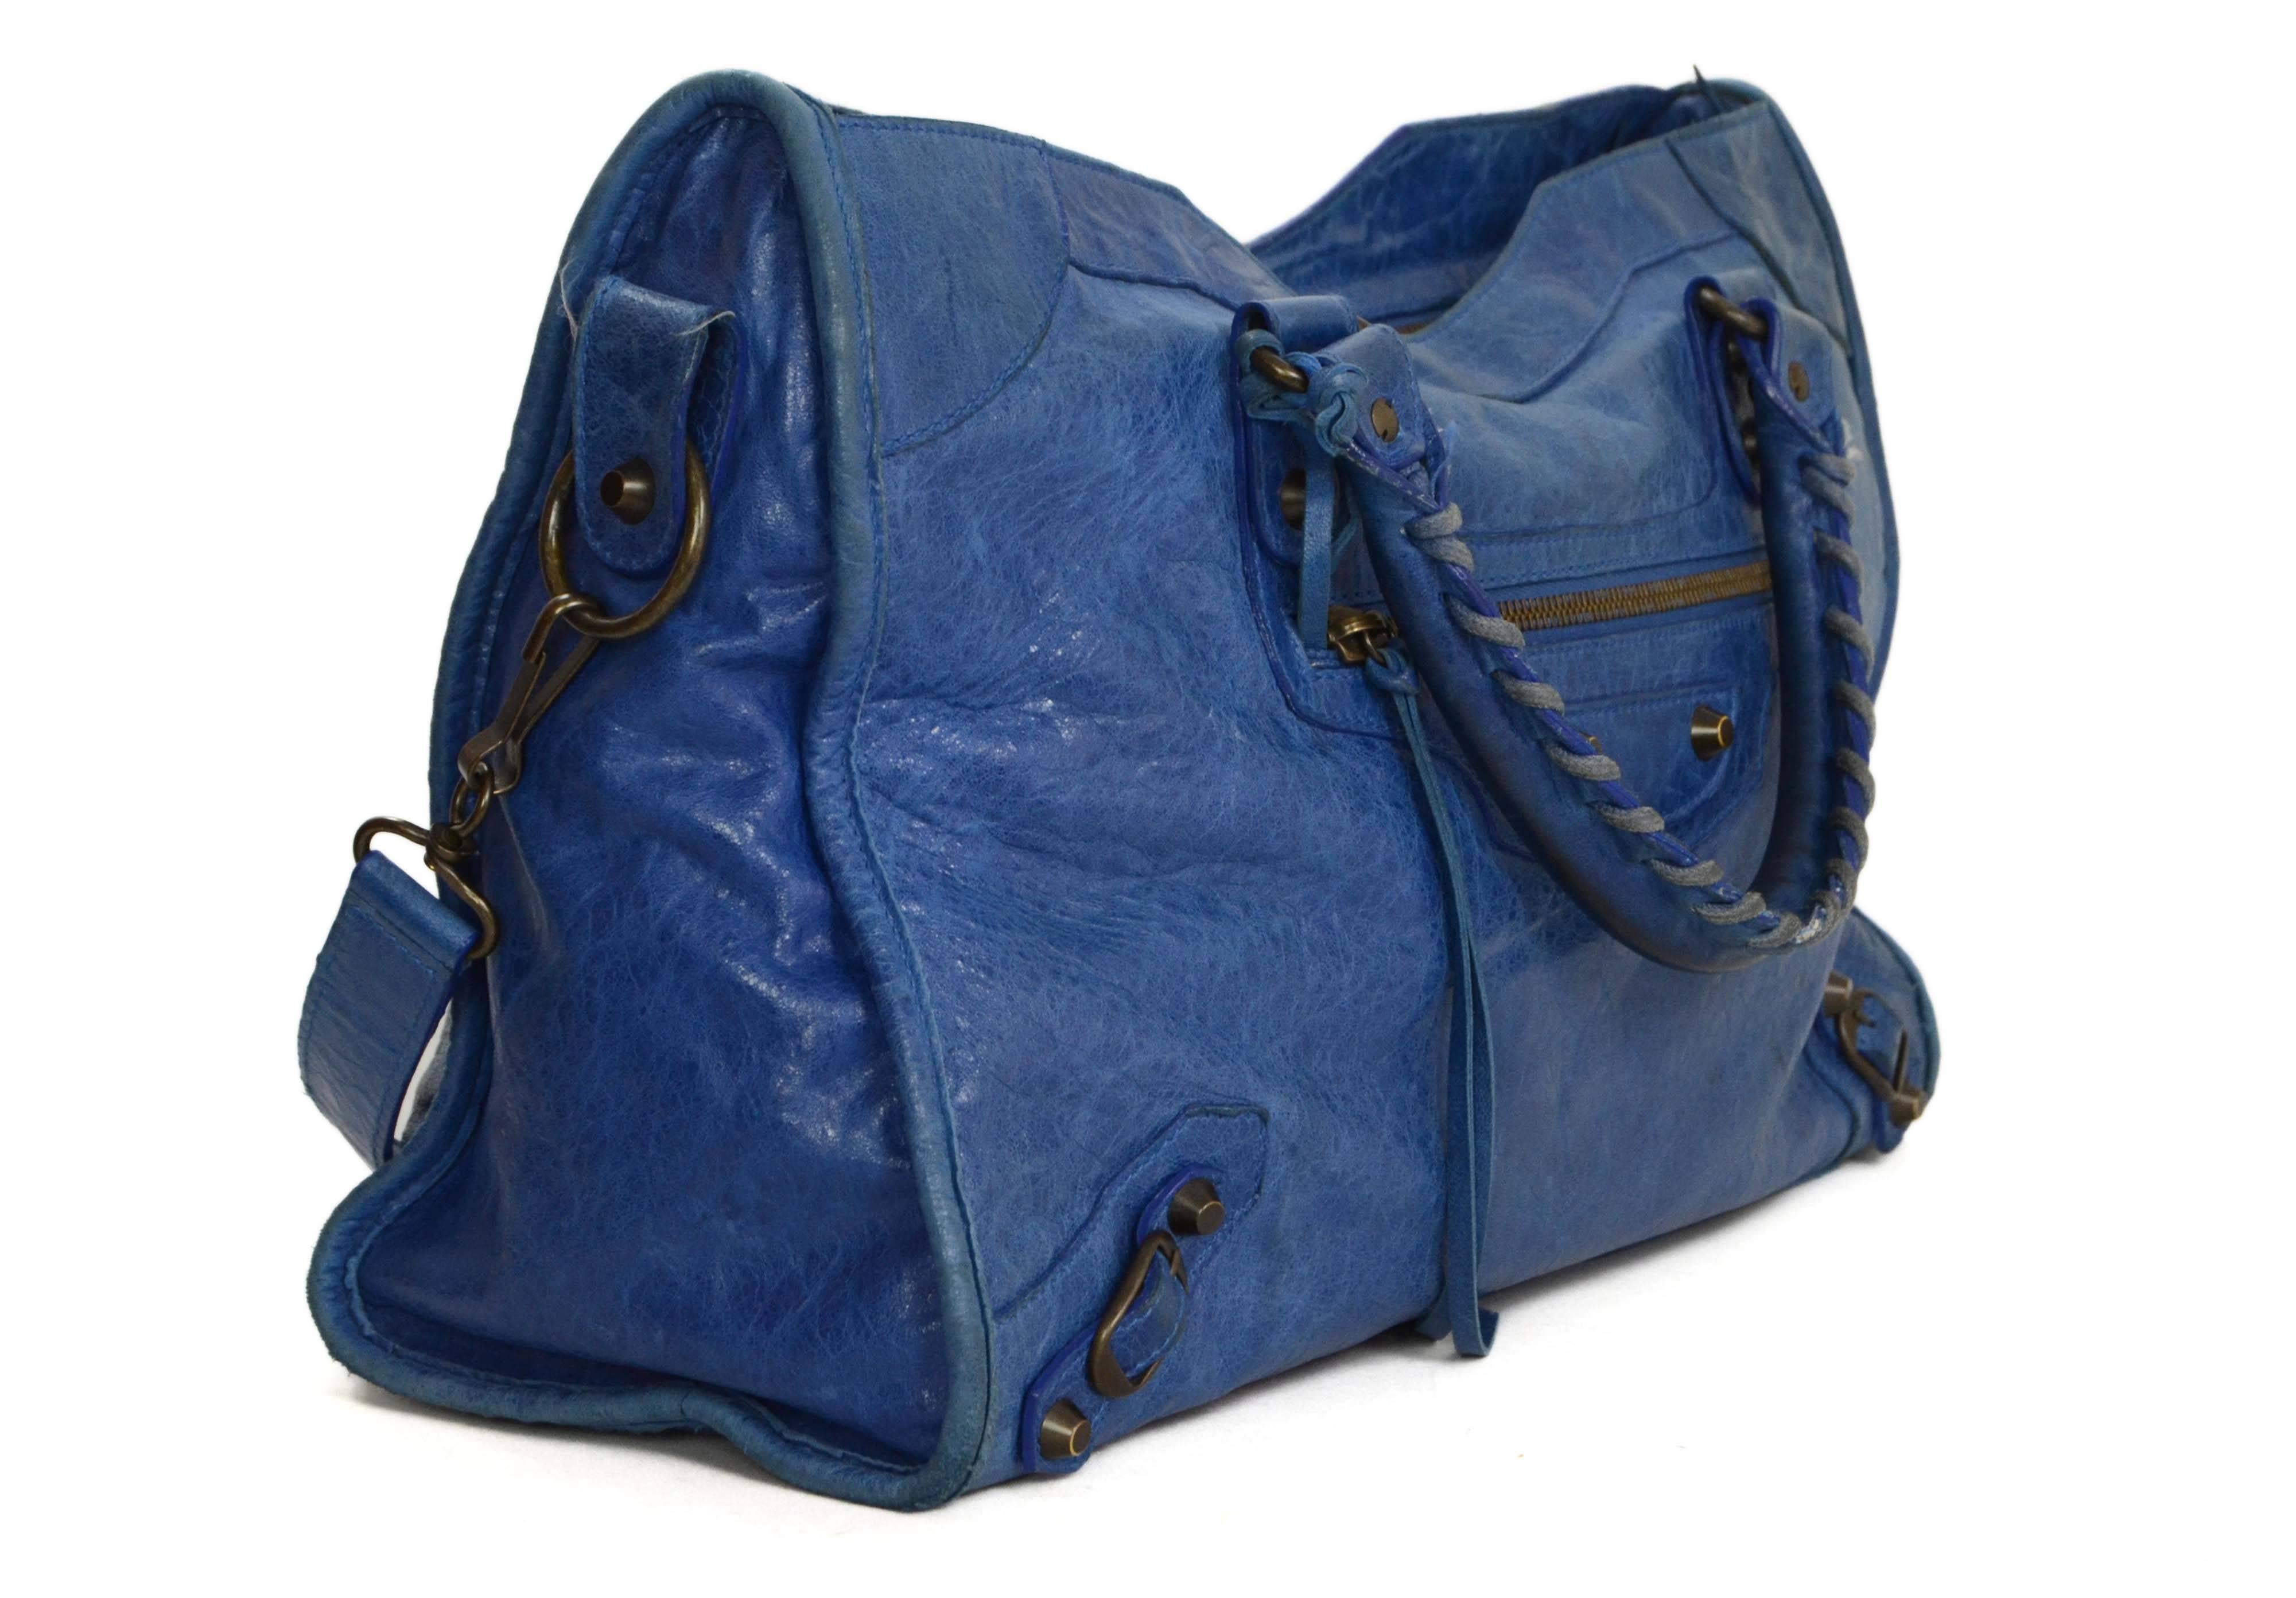 Balenciaga Blue Distressed Leather “City” Bag
Features detachable shoulder strap
Made In: Italy
Color: Blue
Hardware: Brass
Materials: Leather and metal
Lining: Black cotton-blend
Closure/Opening: Double zip across top
Exterior Pockets: One